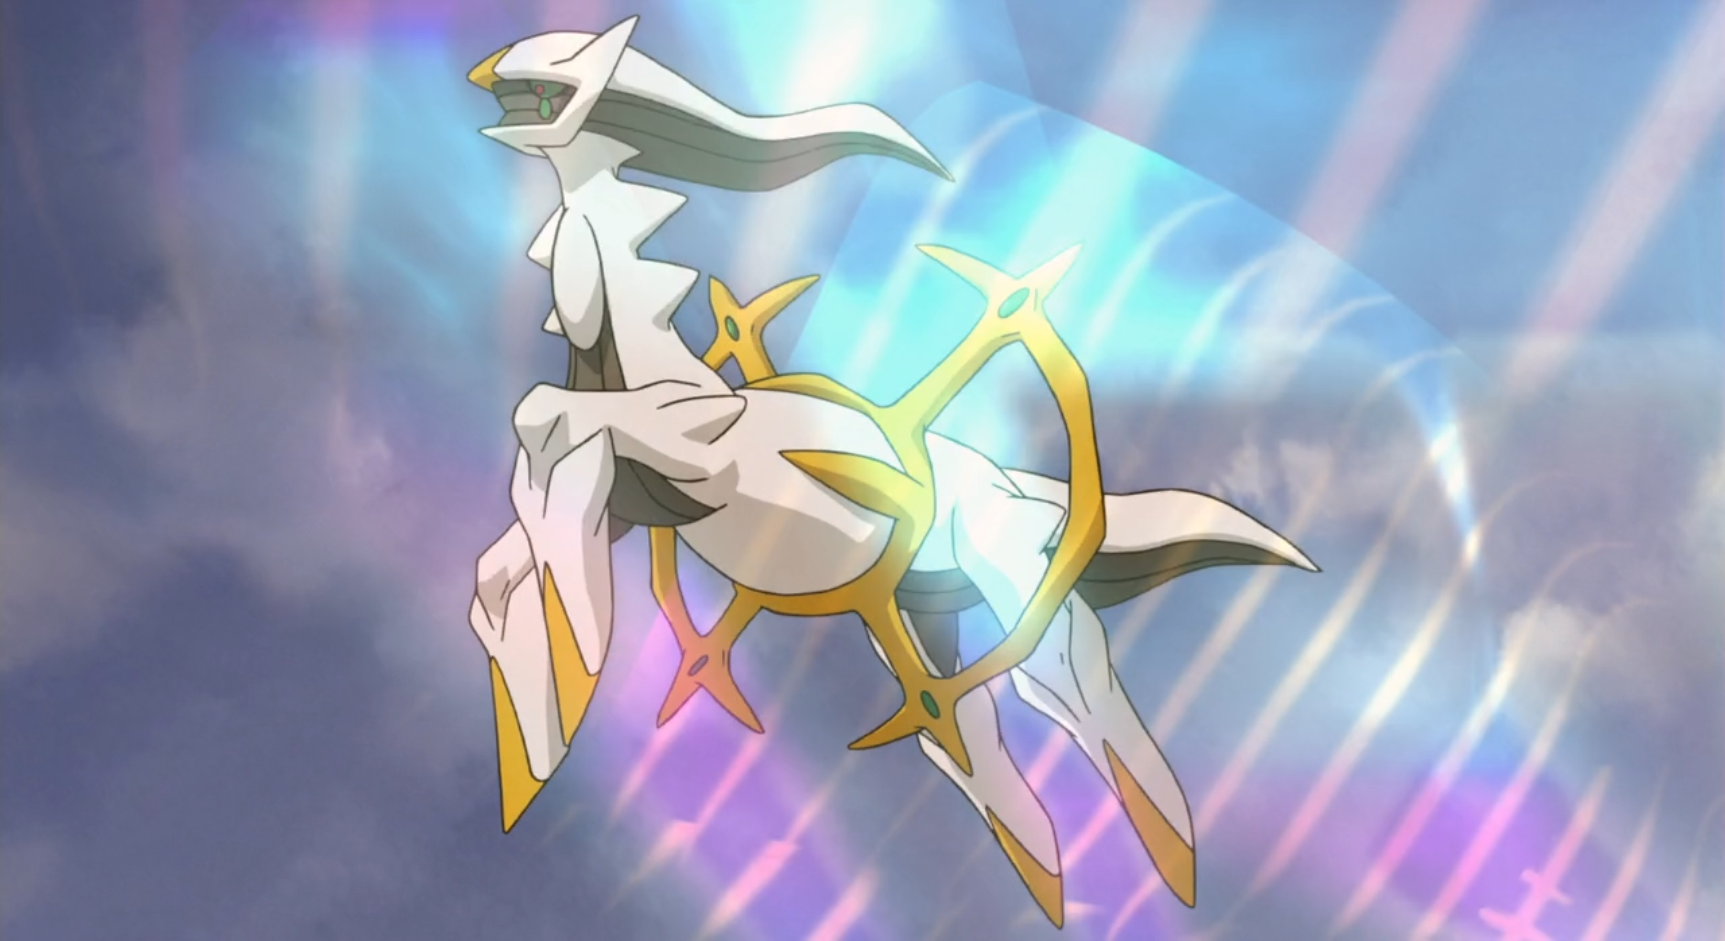 Pokémon Legends Arceus to Become a Web Anime This Year - IGN